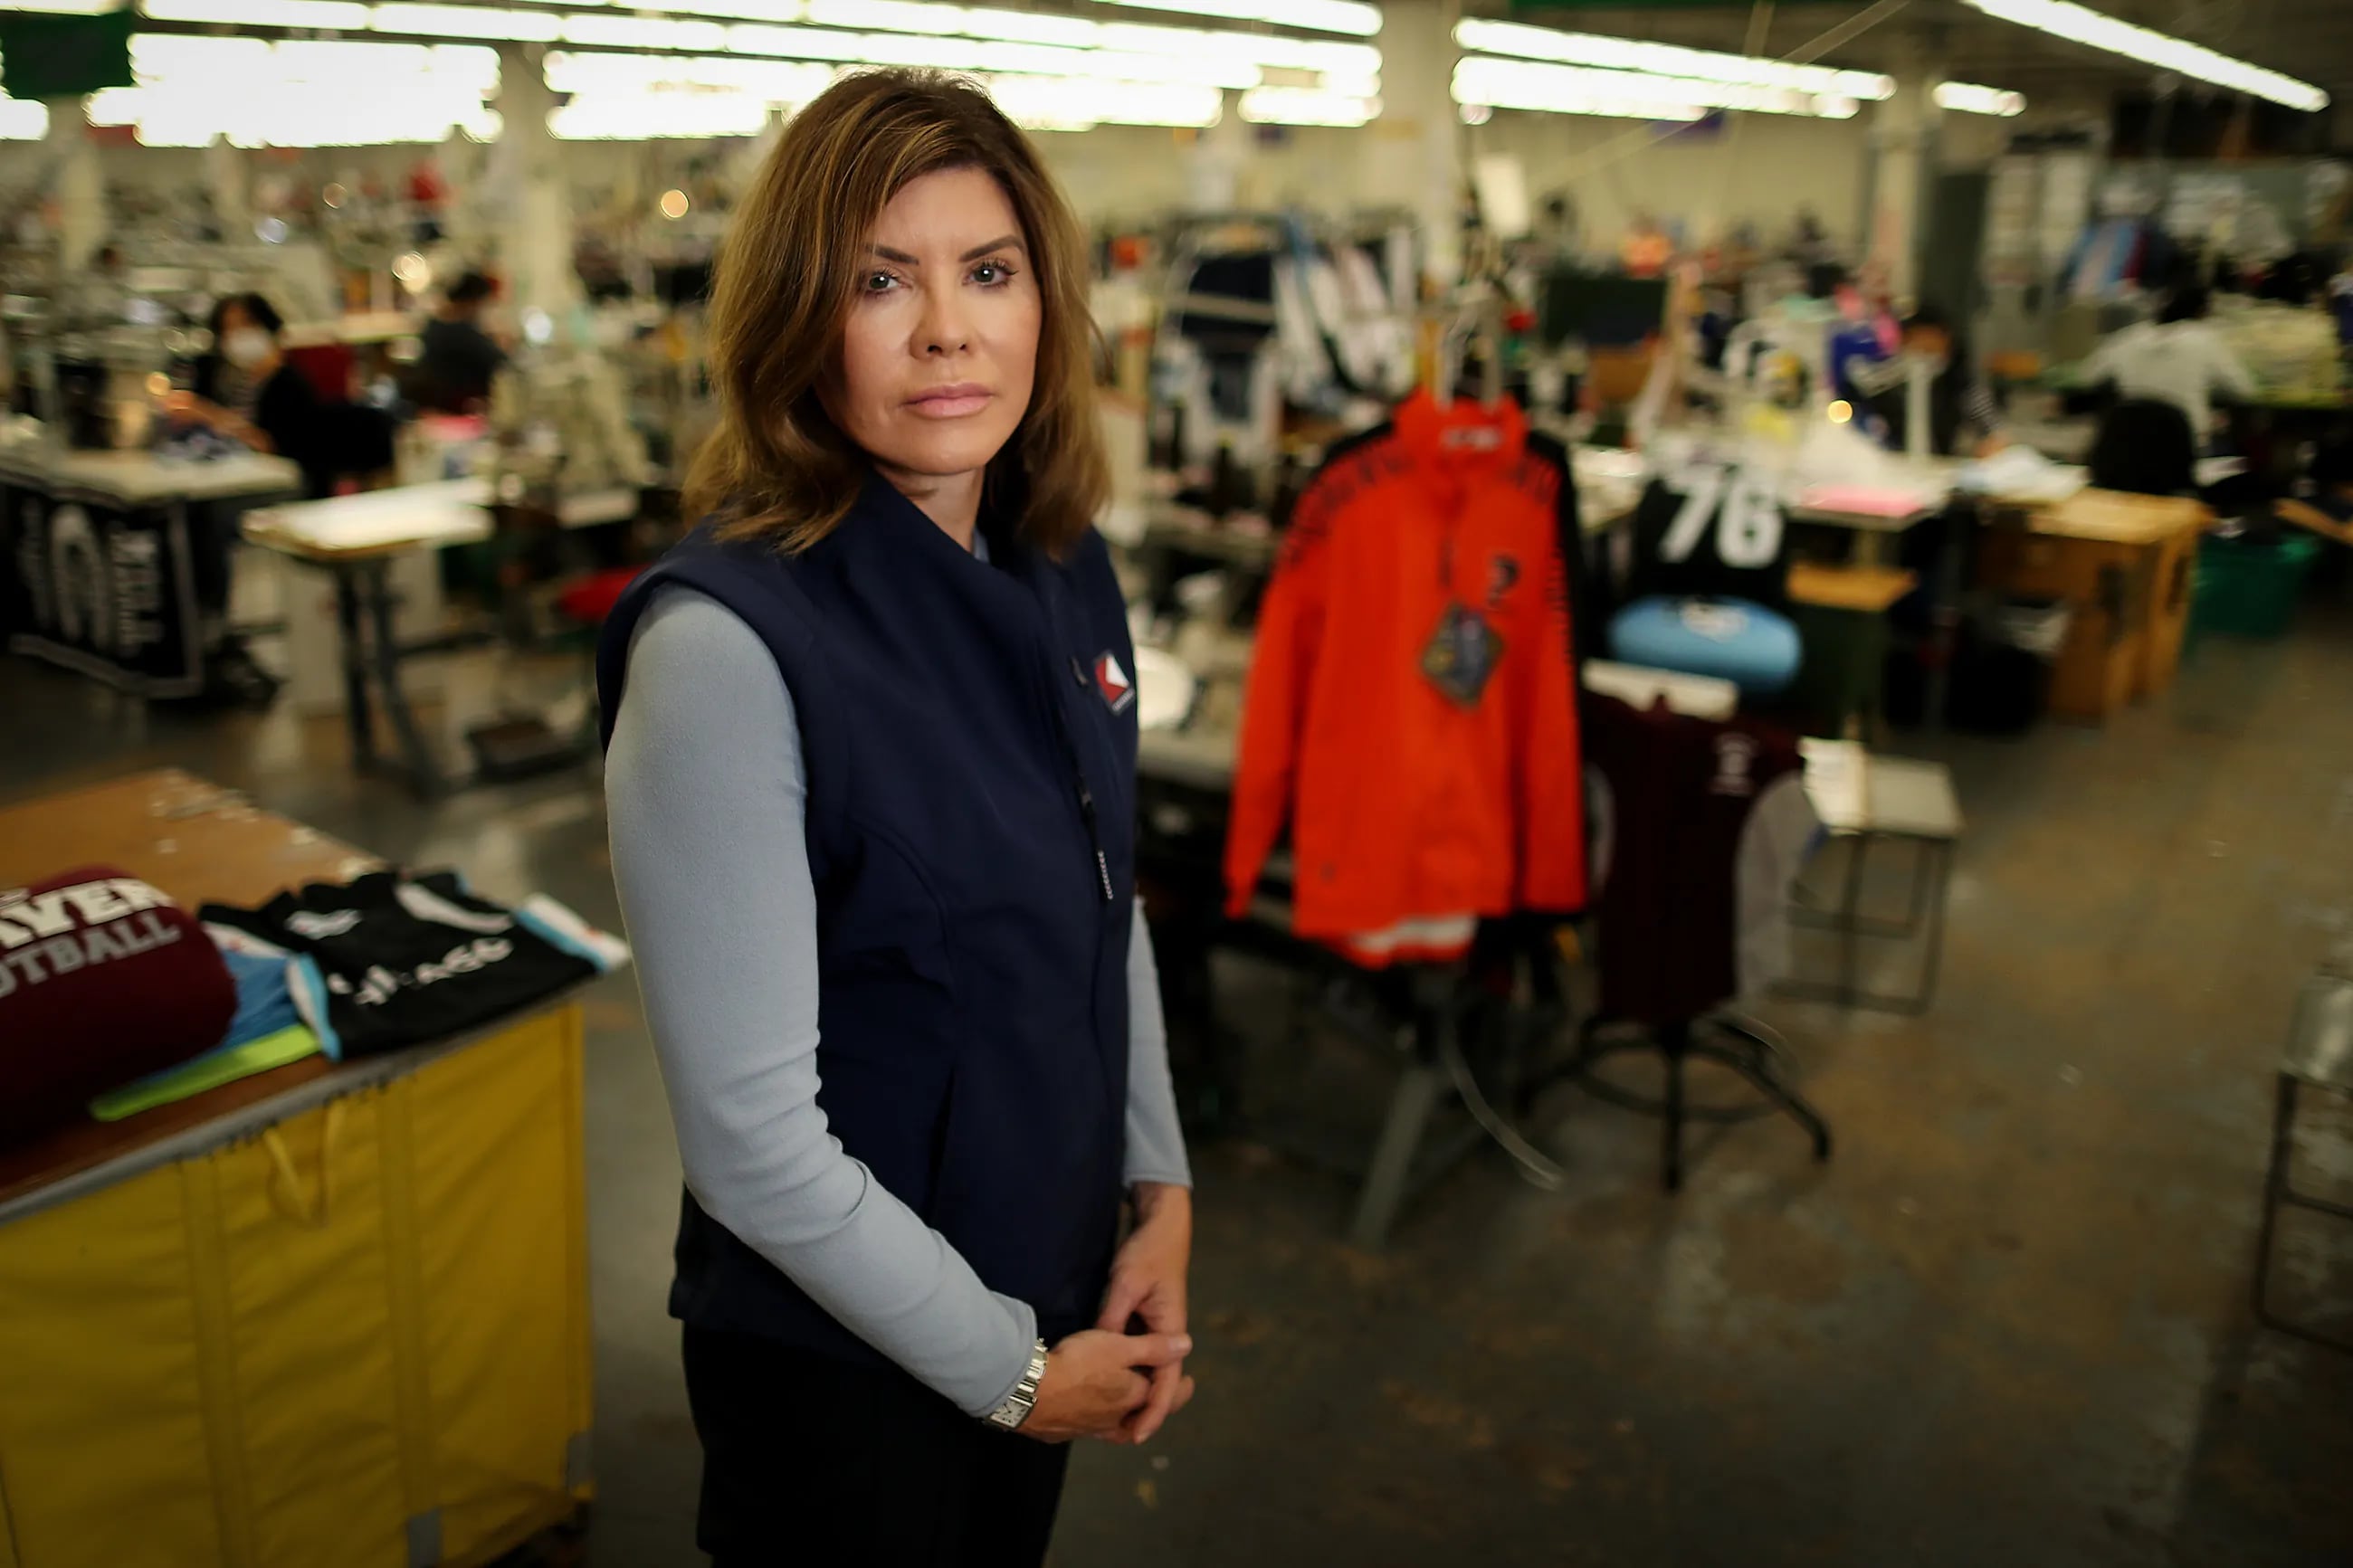 Cindy DiPietrantonio, CEO at Boathouse Sports, poses for a portrait at its headquarters in Philadelphia on Oct. 20, 2020.